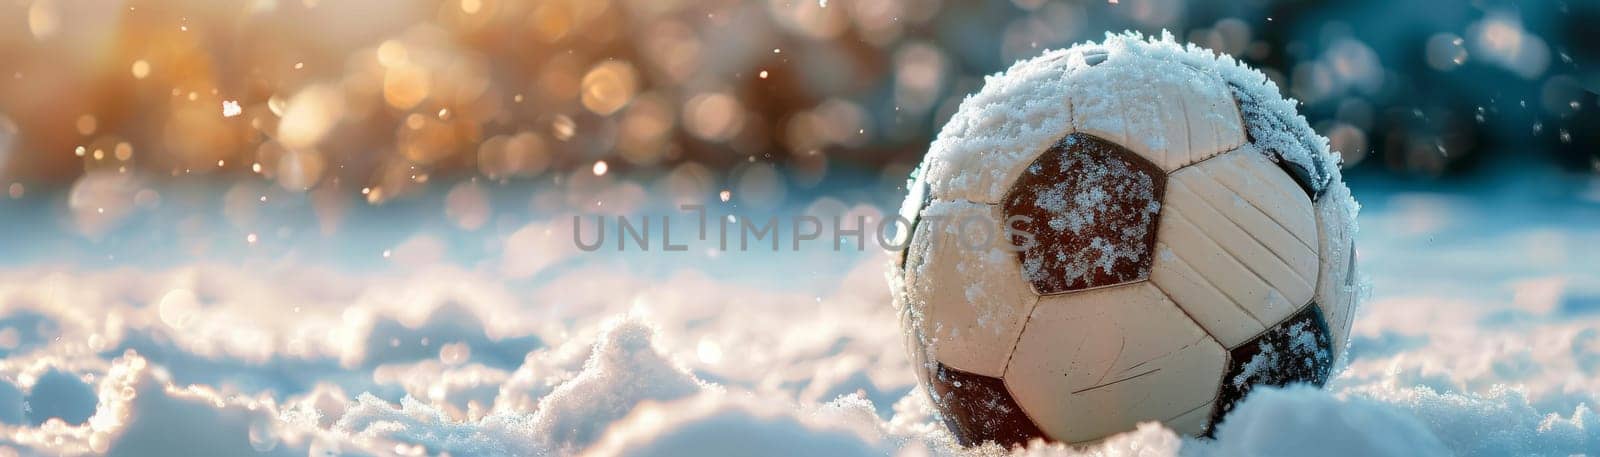 A soccer ball is sitting in the snow. The image has a peaceful and serene mood